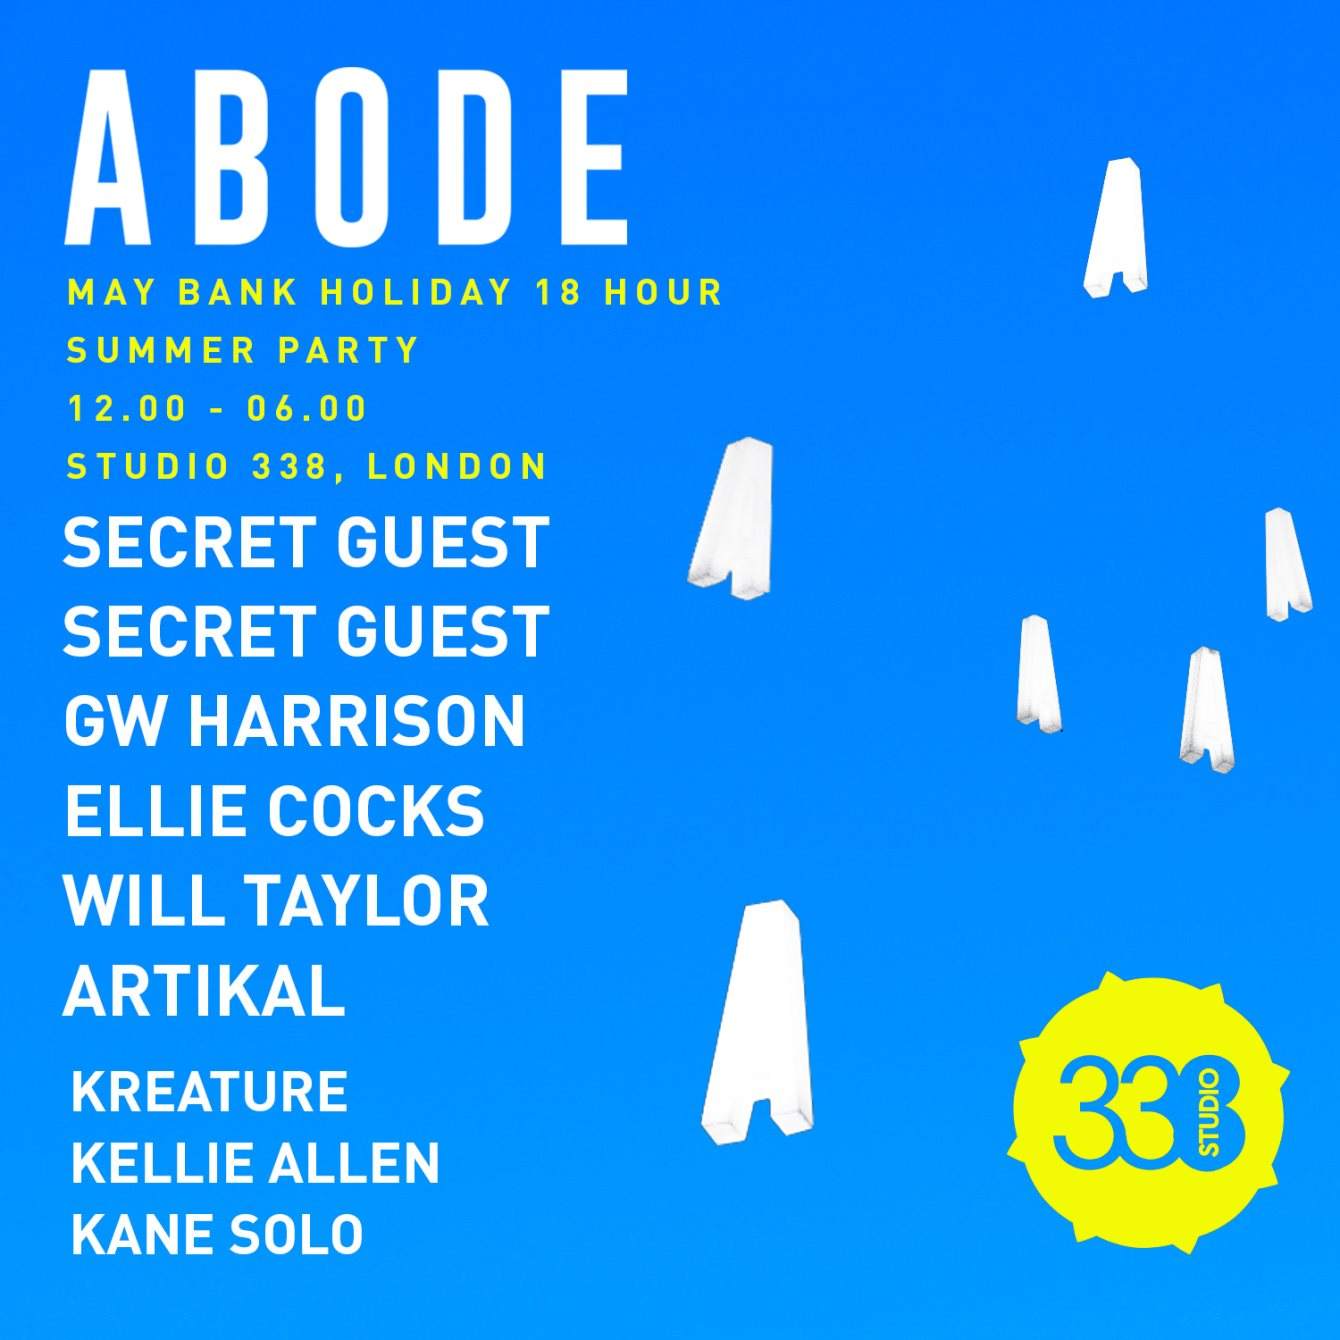 ABODE Summer Bank Holiday 18 Hour Party - Página frontal